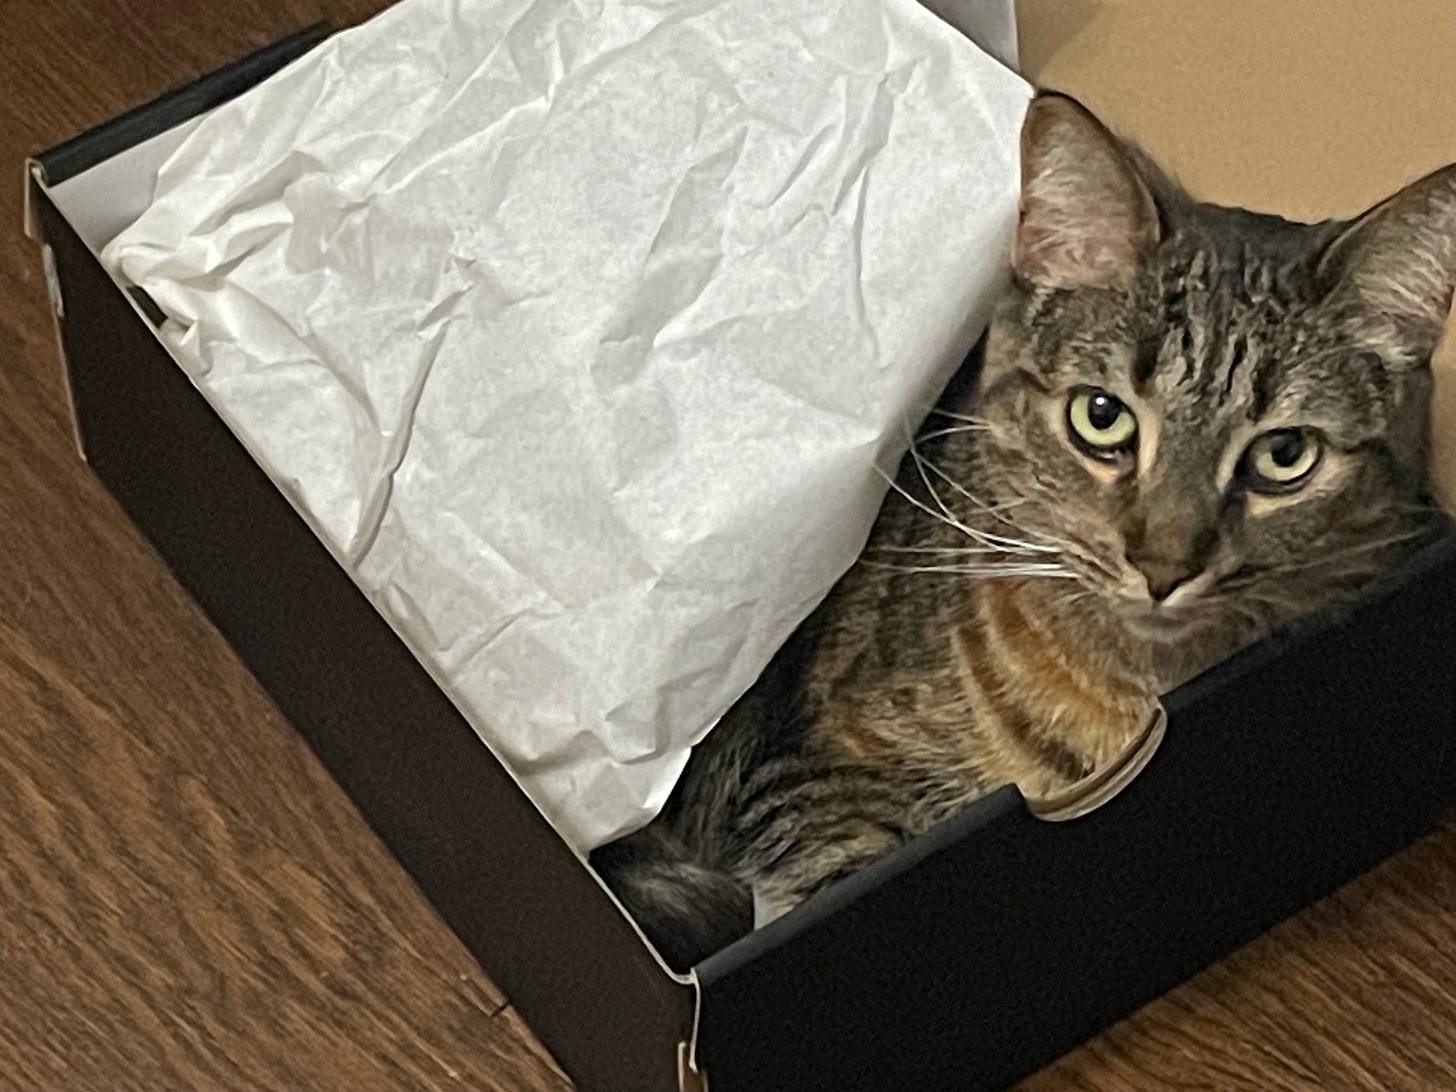 An indescribably beautiful brown tabby cat sits in a box, looking at you with her big yellow eyes.